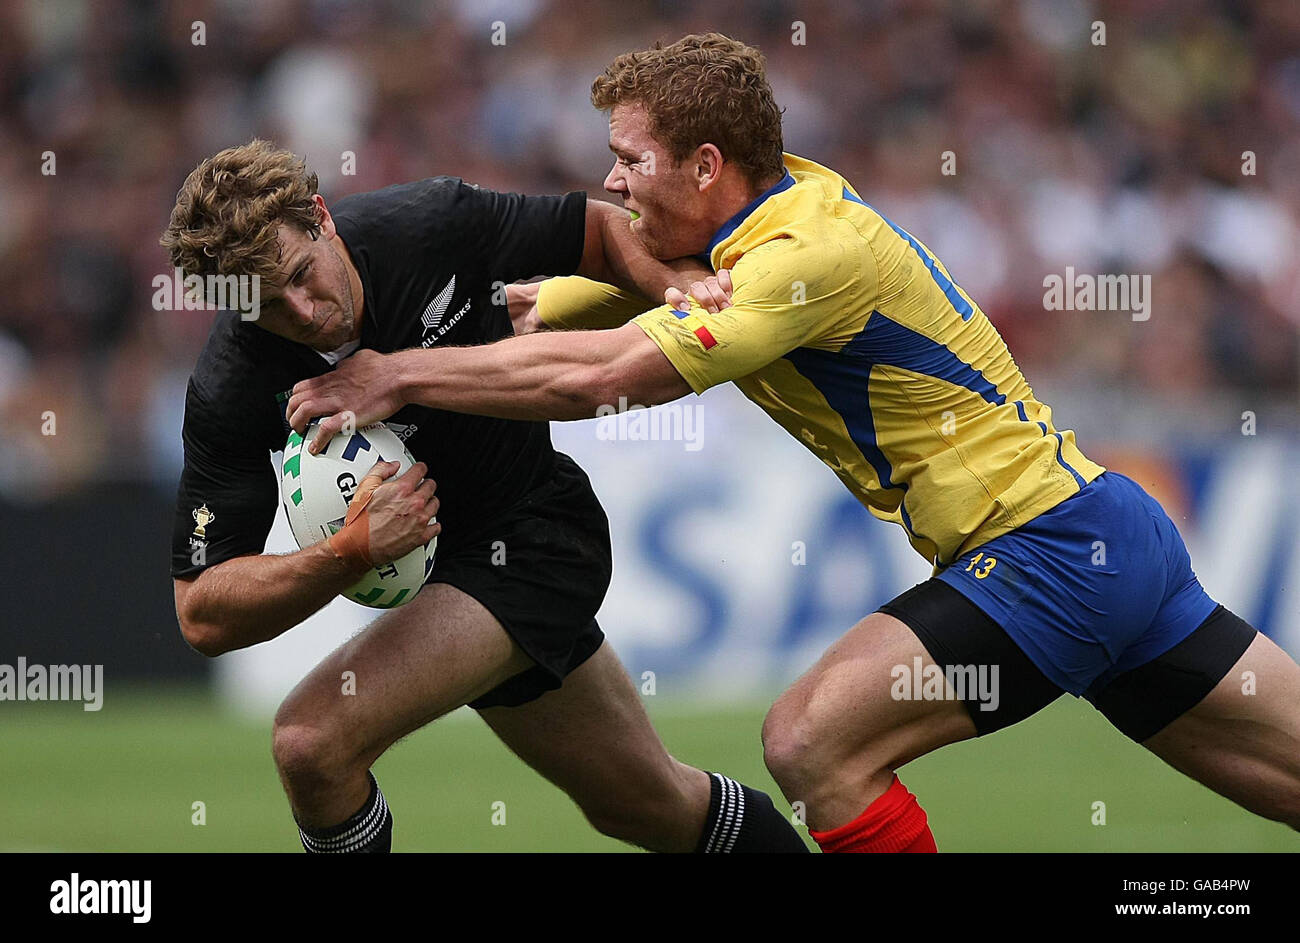 New Zealand's Nick Evans is tackled by Romania's Csaba Gal during the IRB Rugby World Cup Pool C match at Le Stade, Toulouse, France. Stock Photo